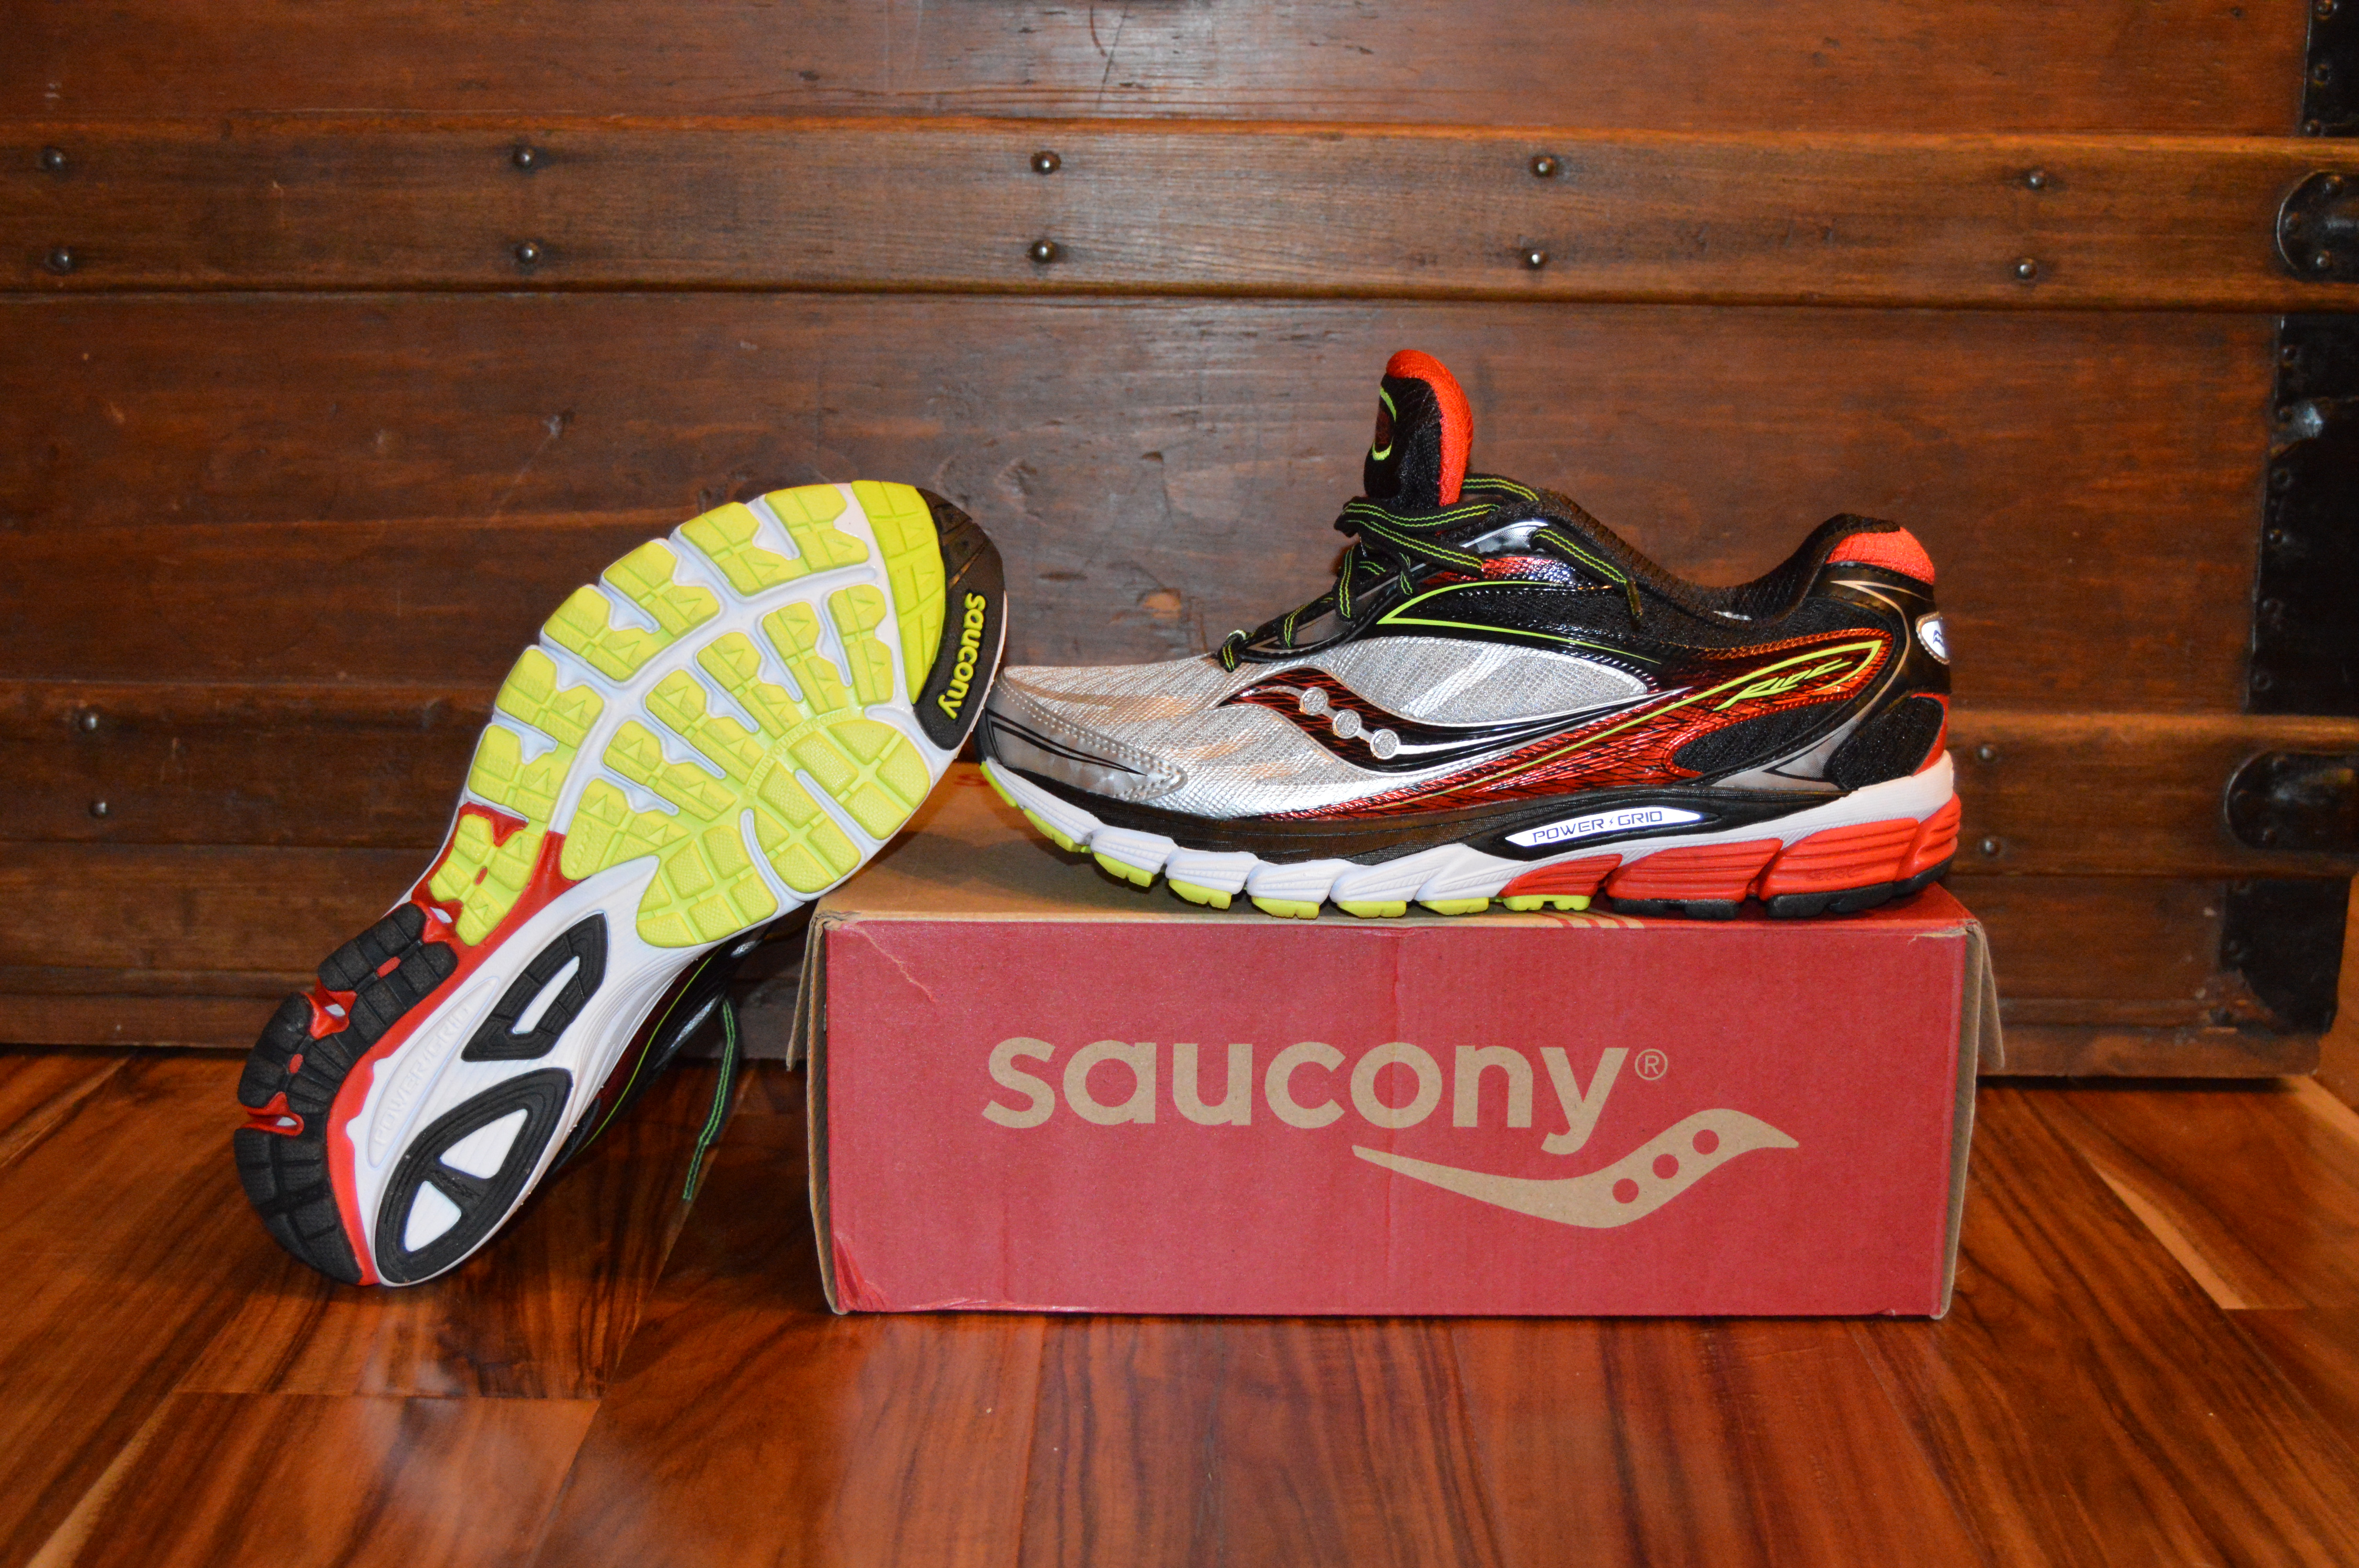 saucony powergrid ride 8 review